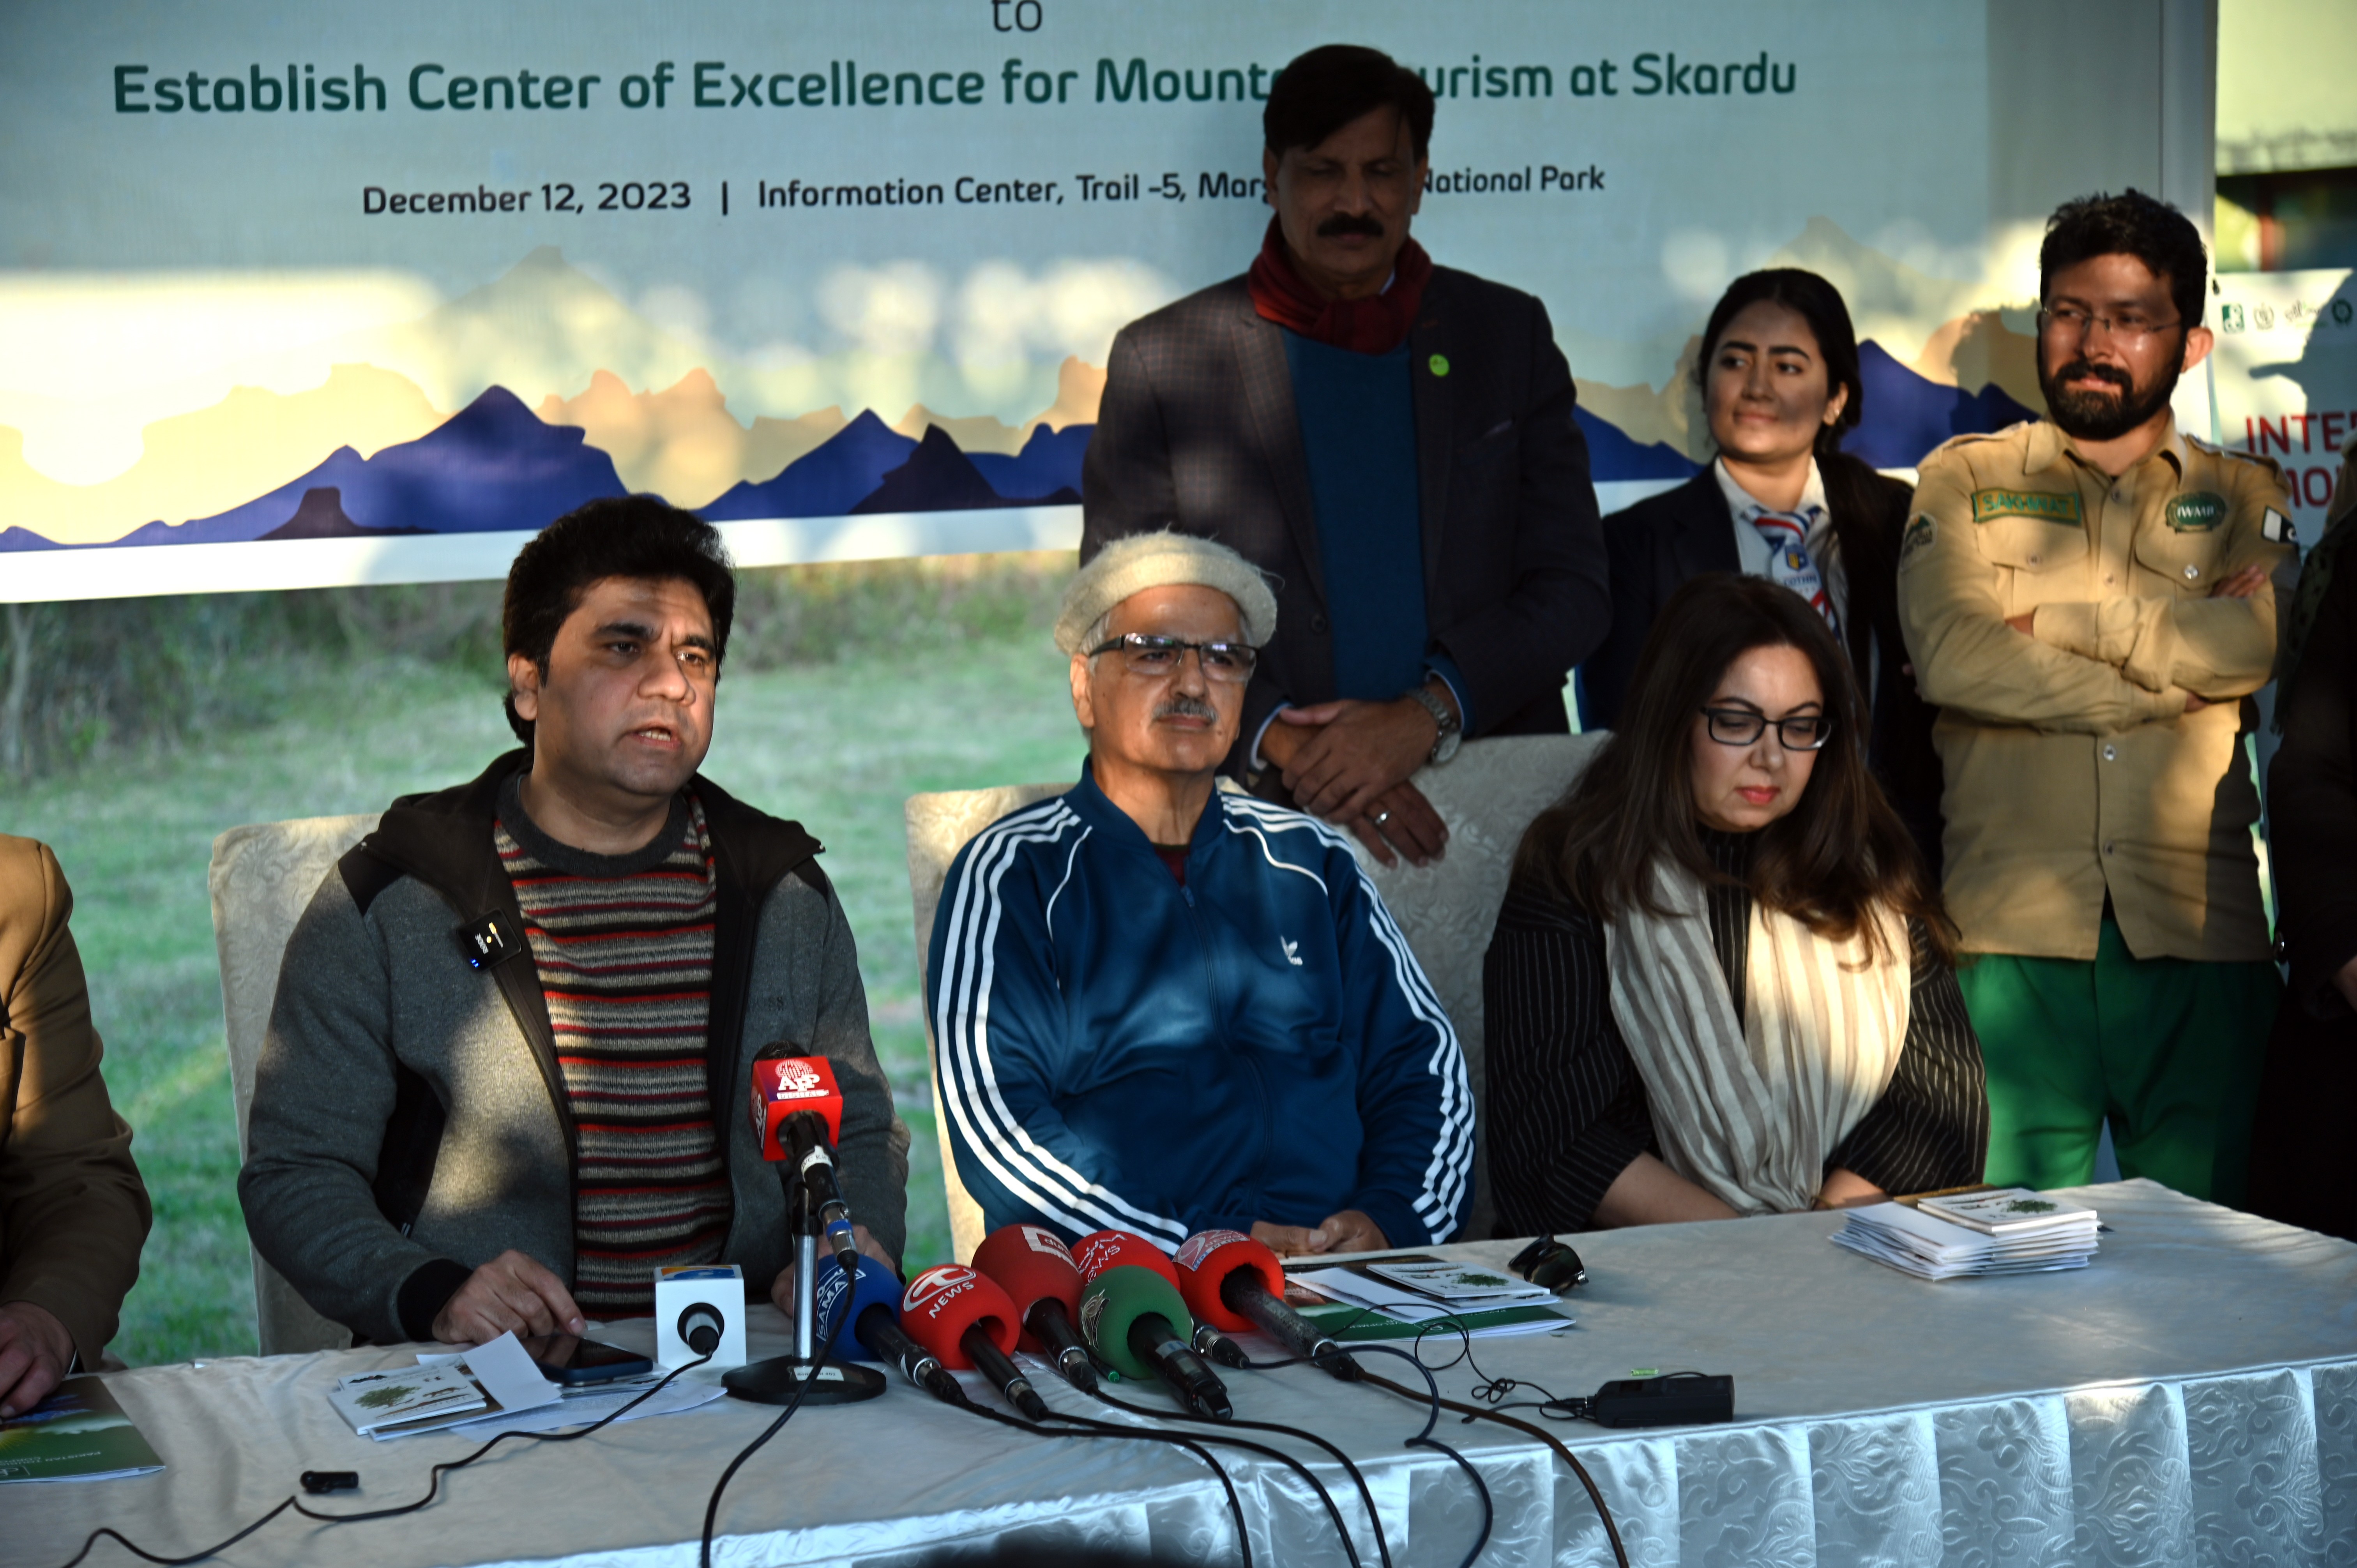 Wasi shah, Minister of State for Tourism, briefing the media about MoU